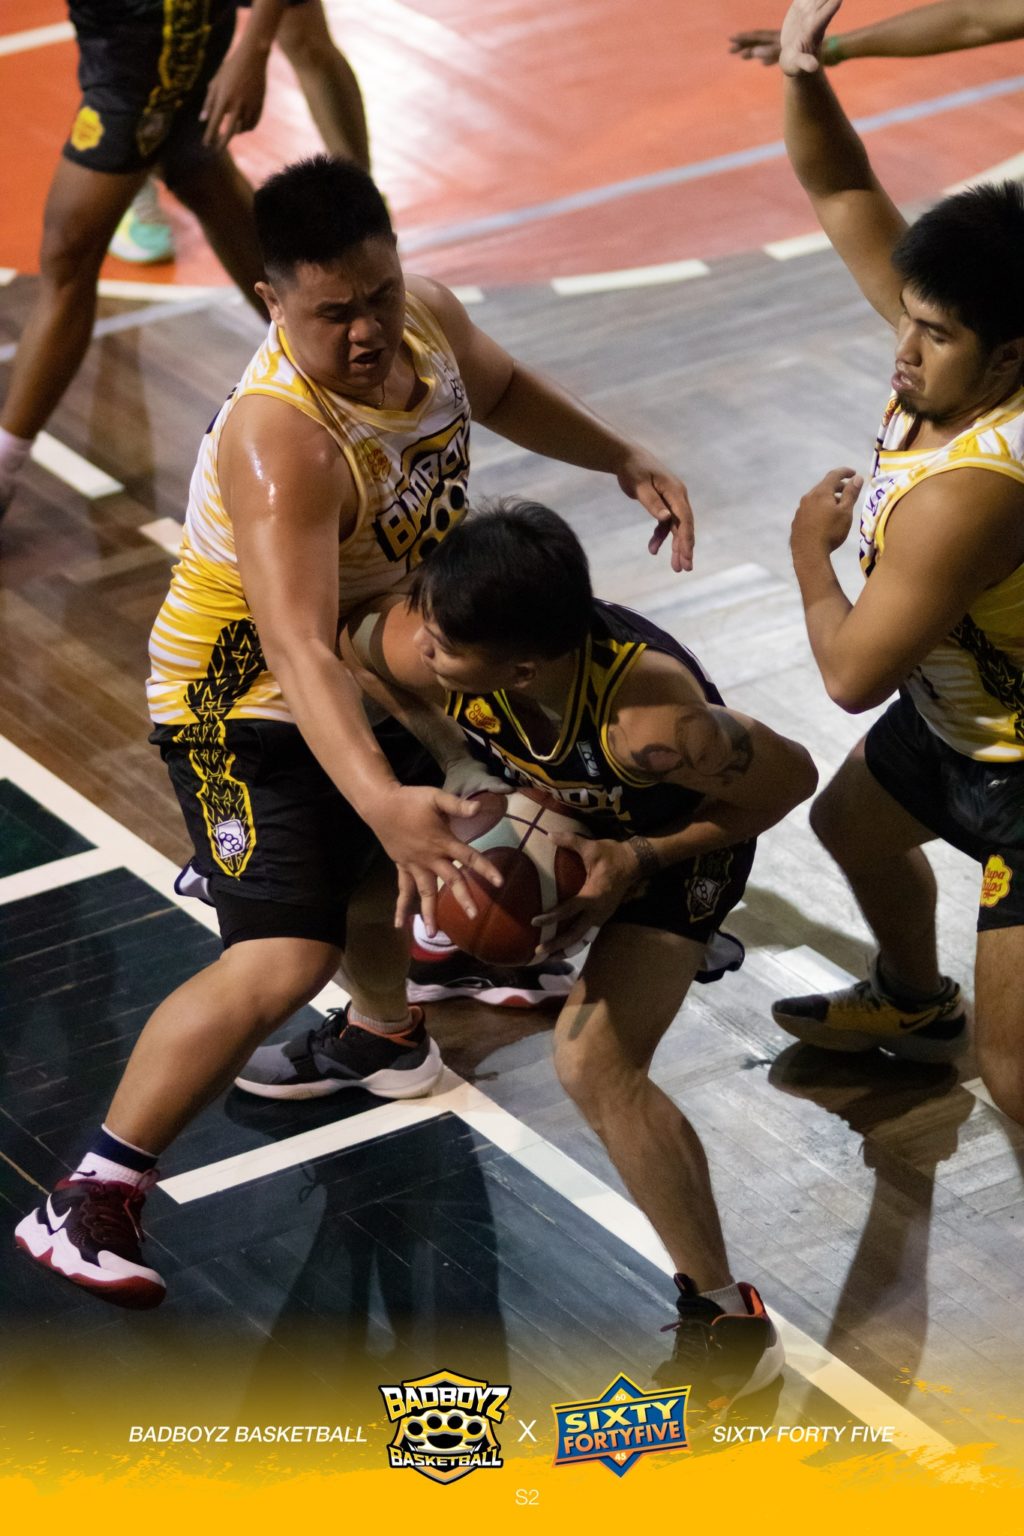 Kyle Co of the Panthers is heavily defended by players from the Dolphinz during their semifinals showdown of the Badboyz Basketball Club (BBC) Season 12 semifinals. | Photo from the Badboyz Basketball Club Facebook page